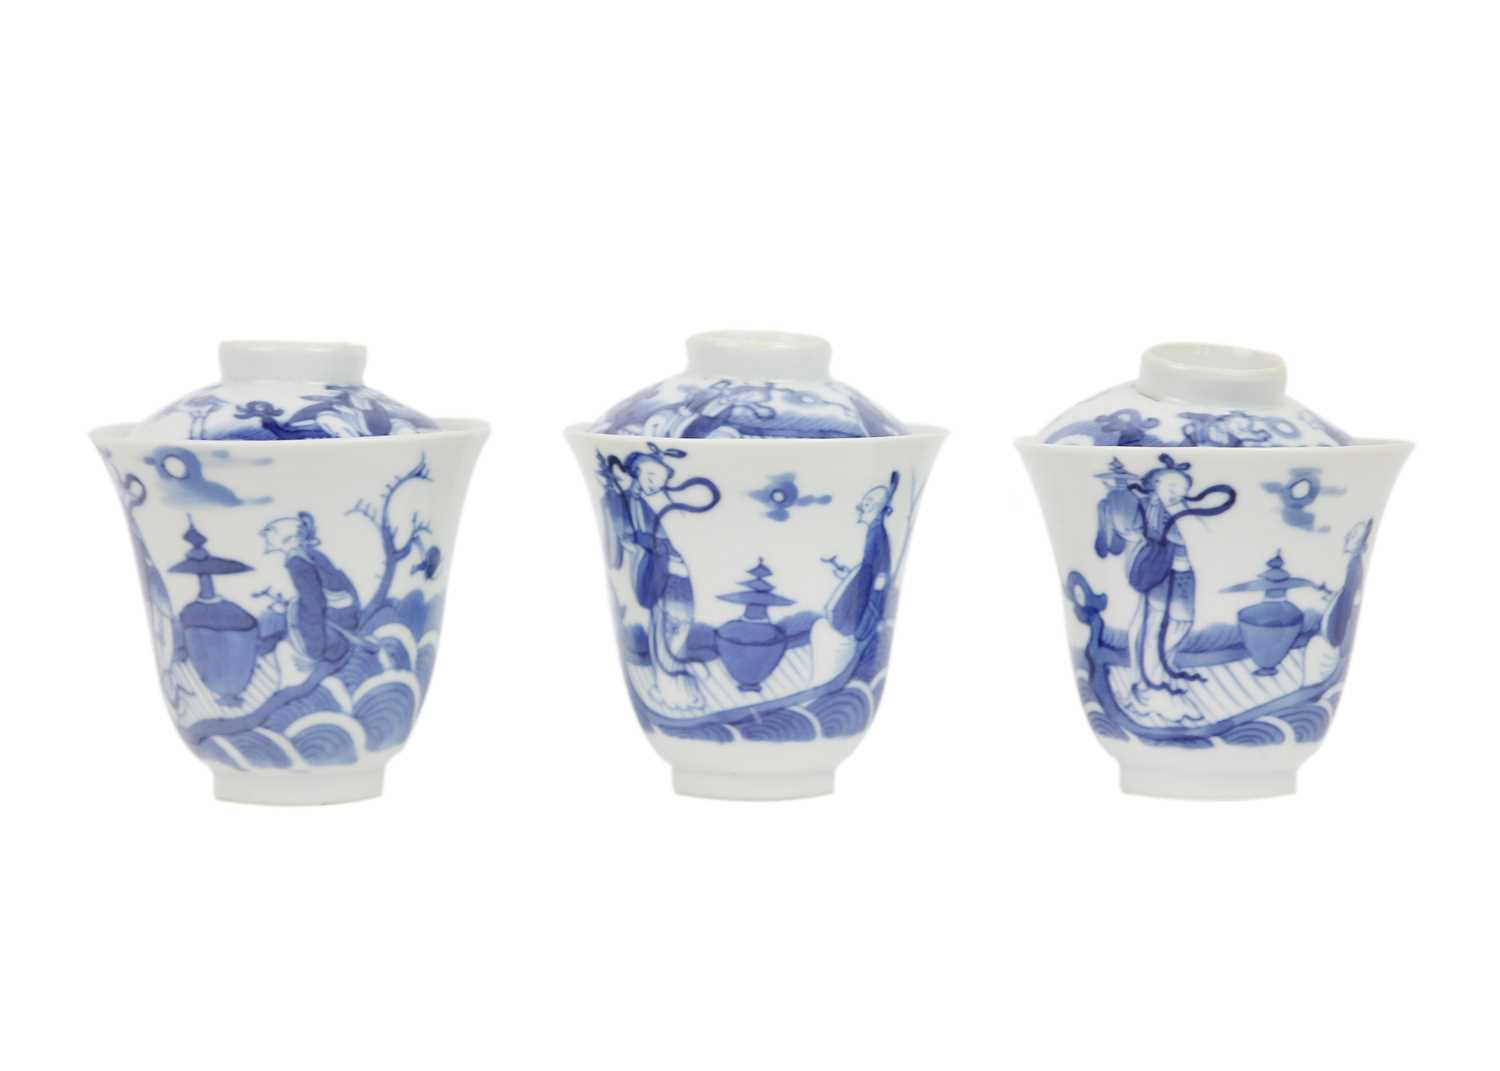 A set of Chinese blue and white porcelain cups, covers and stands, 18th century. - Image 4 of 41